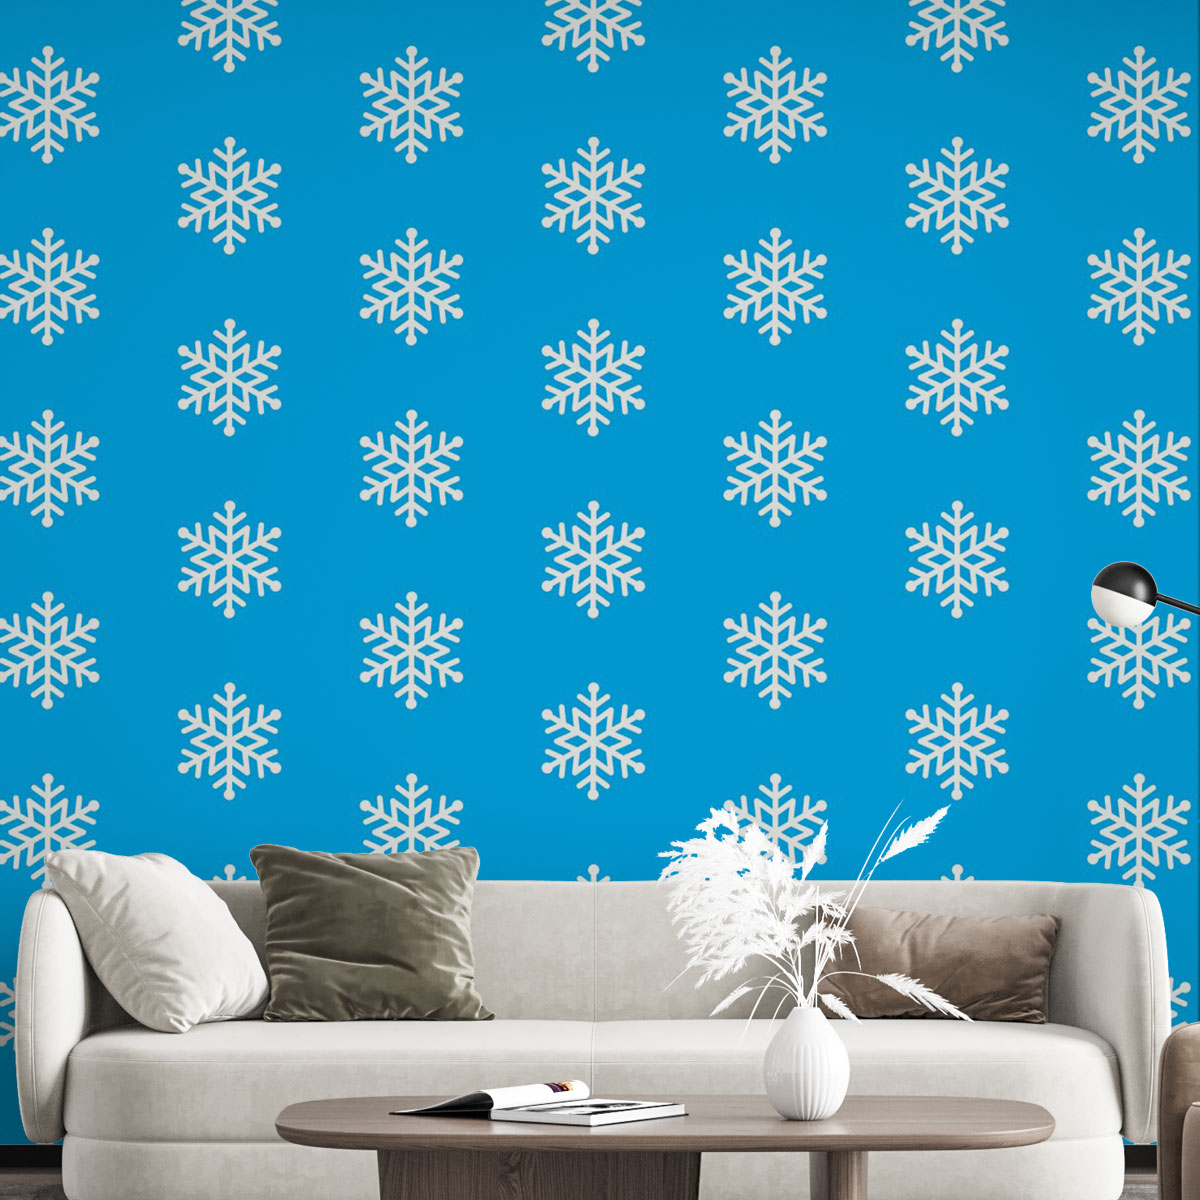 Christmas Snowflake Clipart On The Blue Background Wall Mural